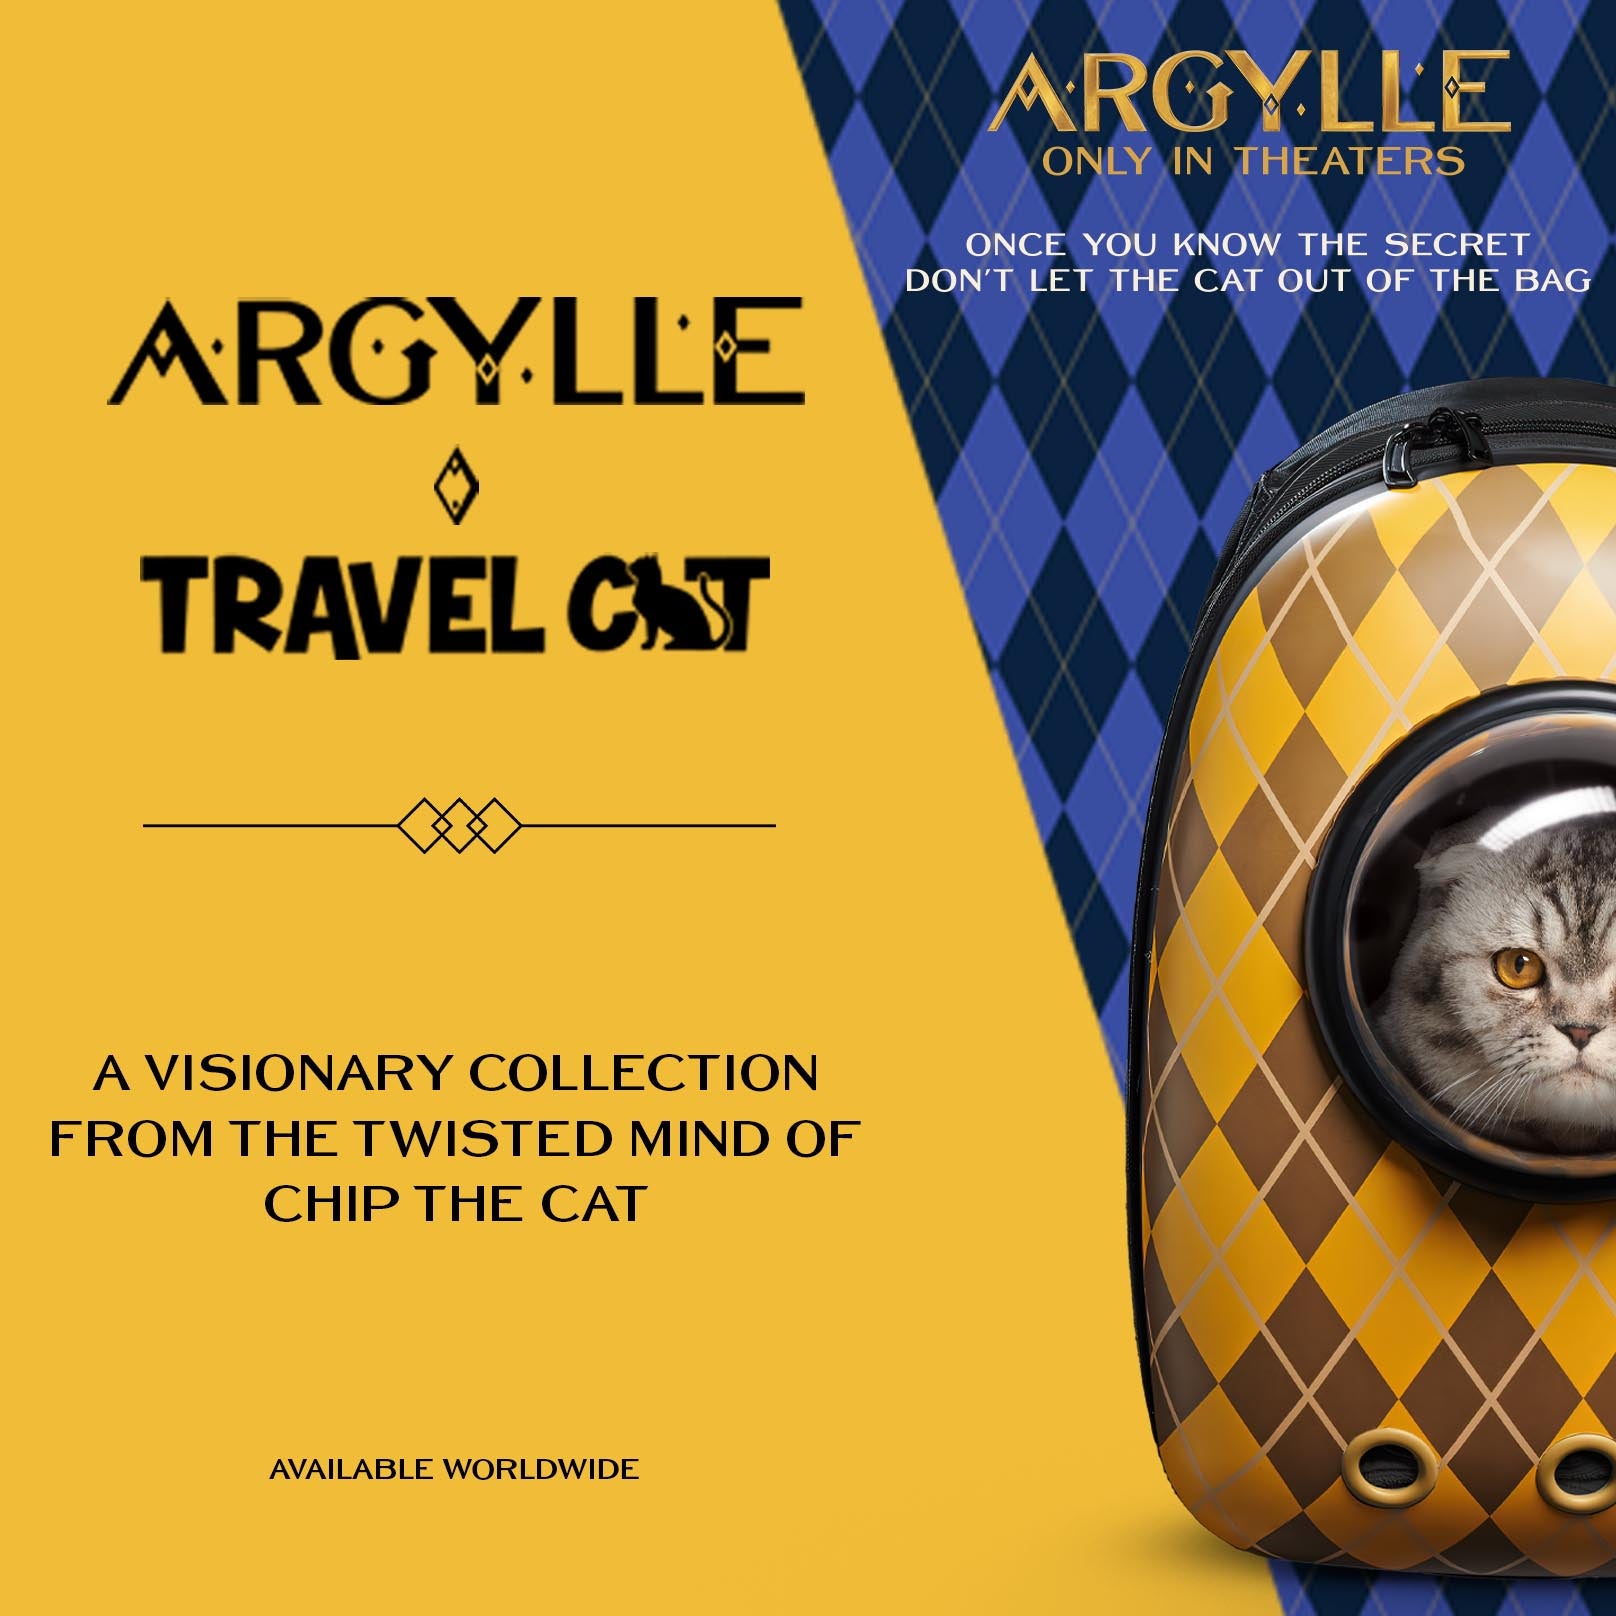 Travel Cat Unveils Exclusive Cat Collection Inspired by Matthew Vaughn's New Blockbuster Film "Argylle," Including Viral Backpack Seen in Film